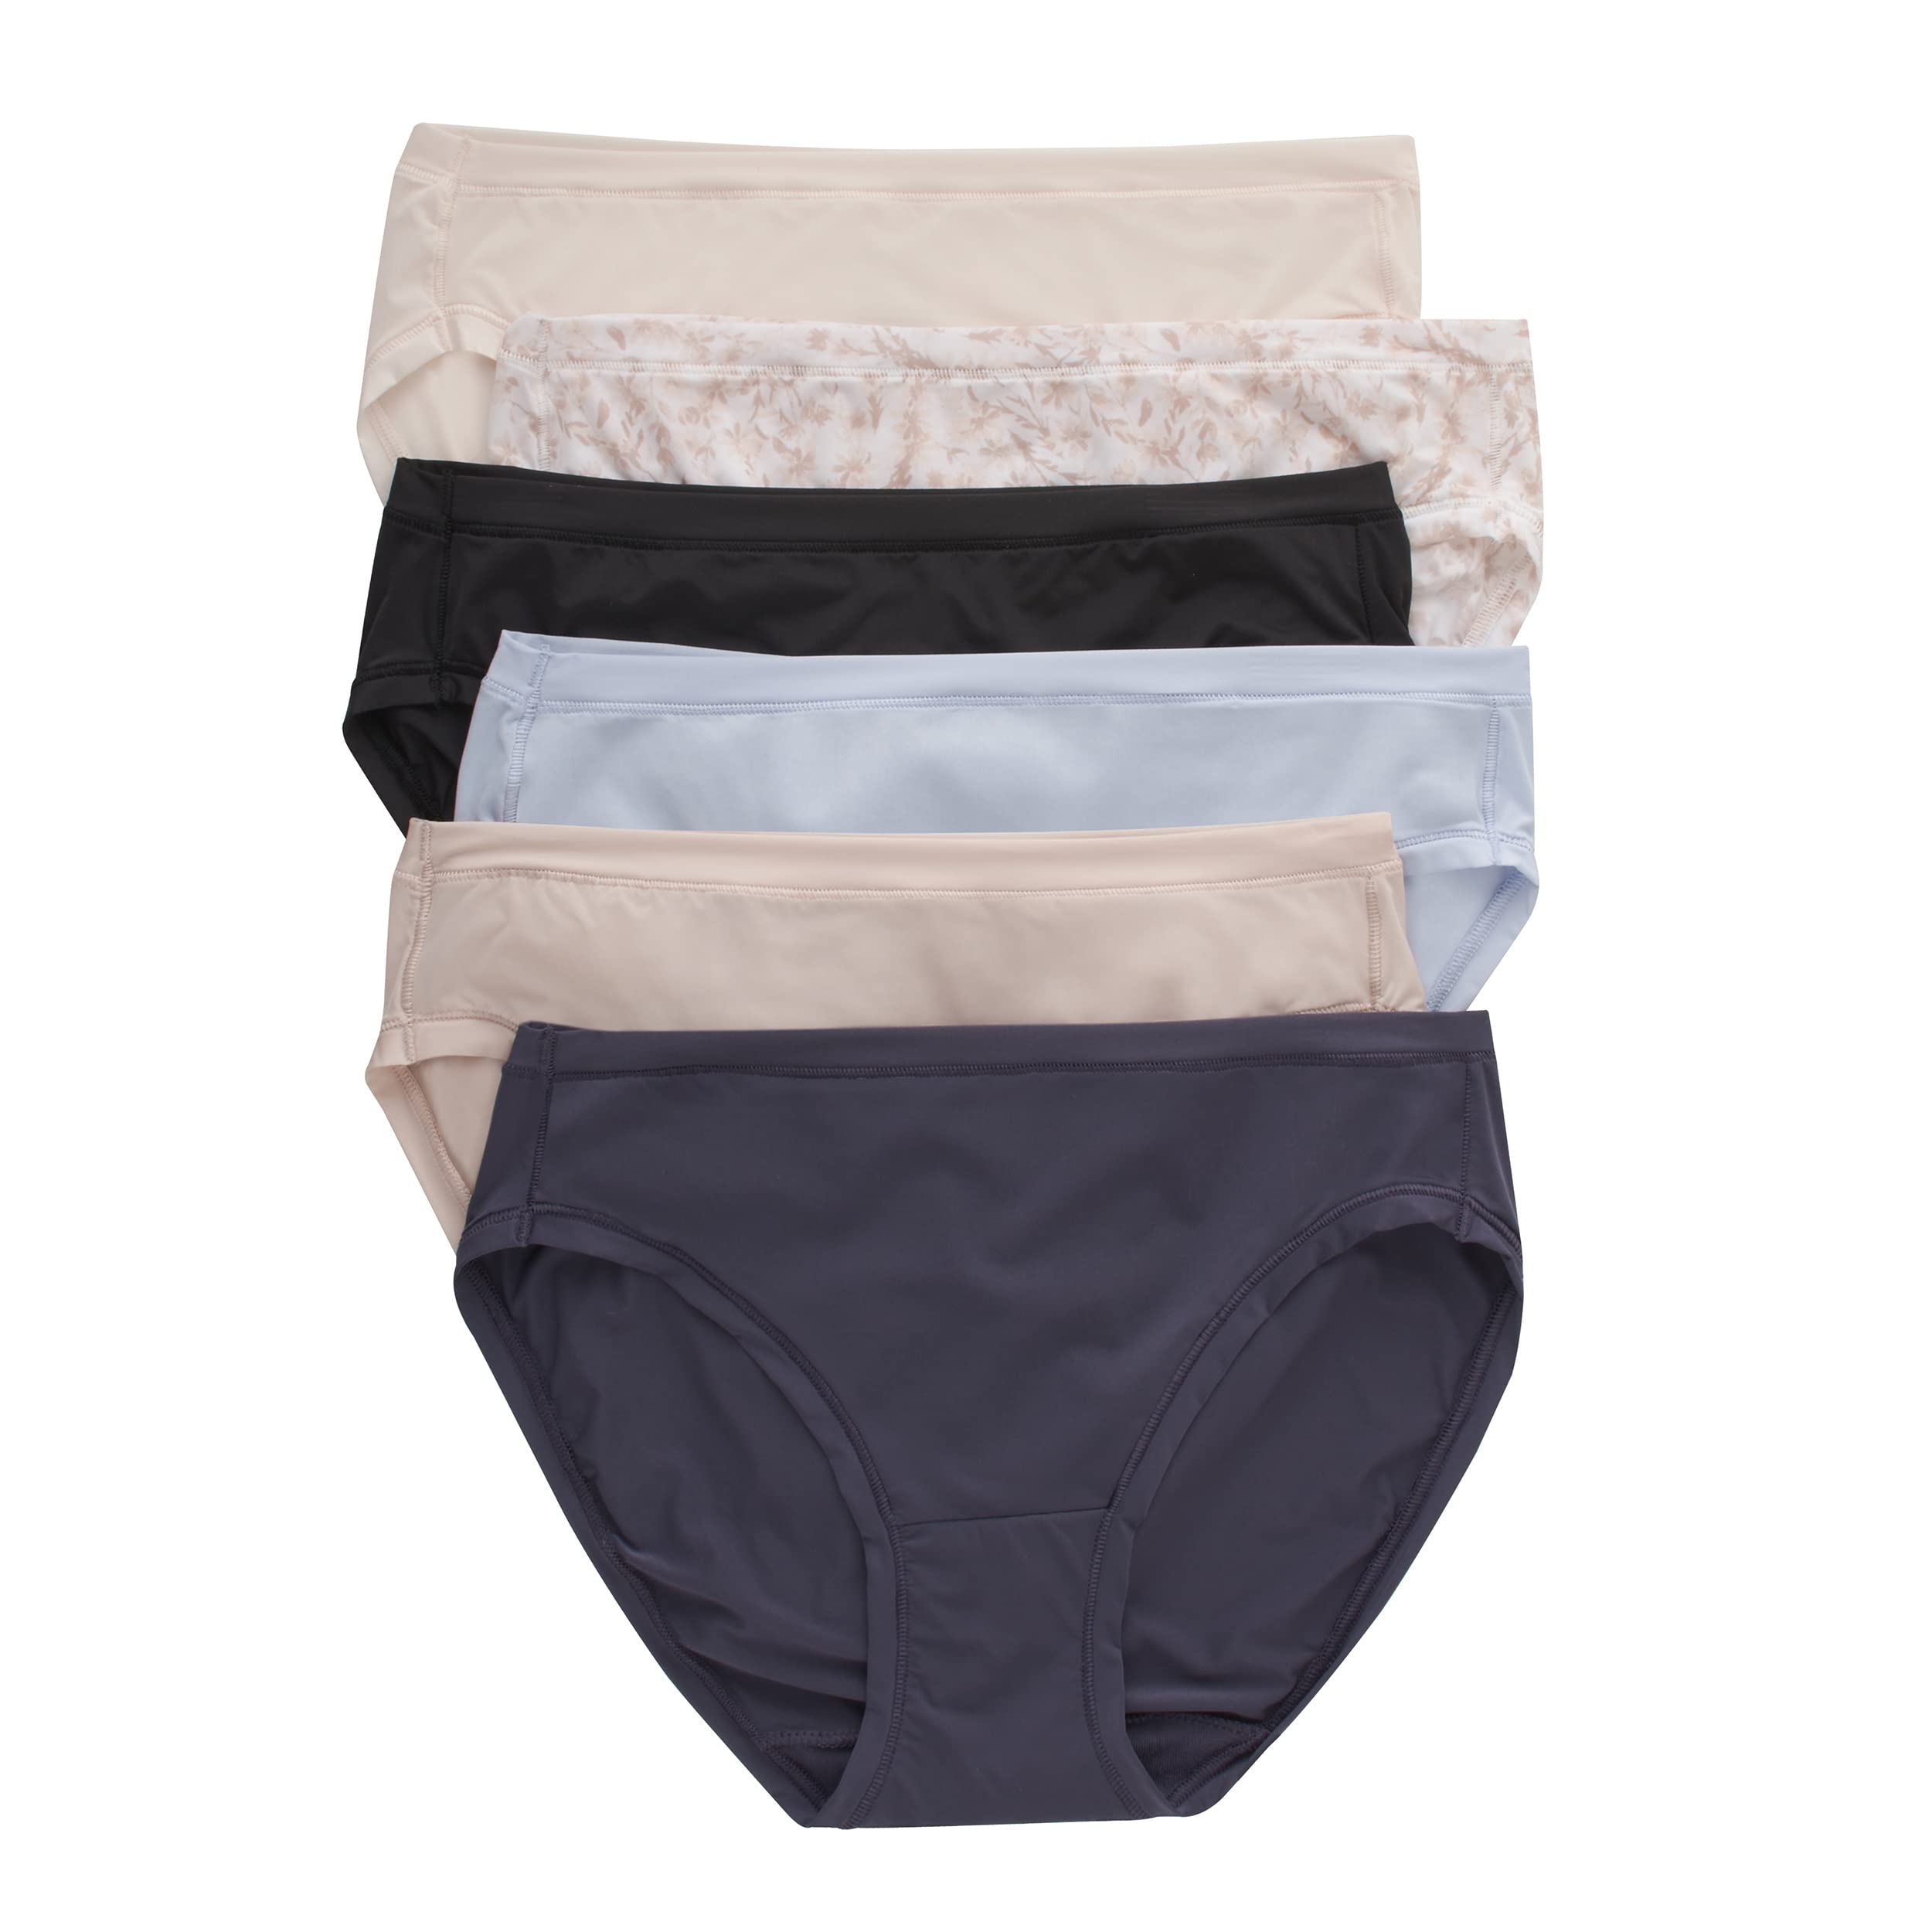 Hanes Women's ComfortFlex Fit Stretch Panties, Cooling Microfiber Underwear, 6-Pack (Colors May Vary)